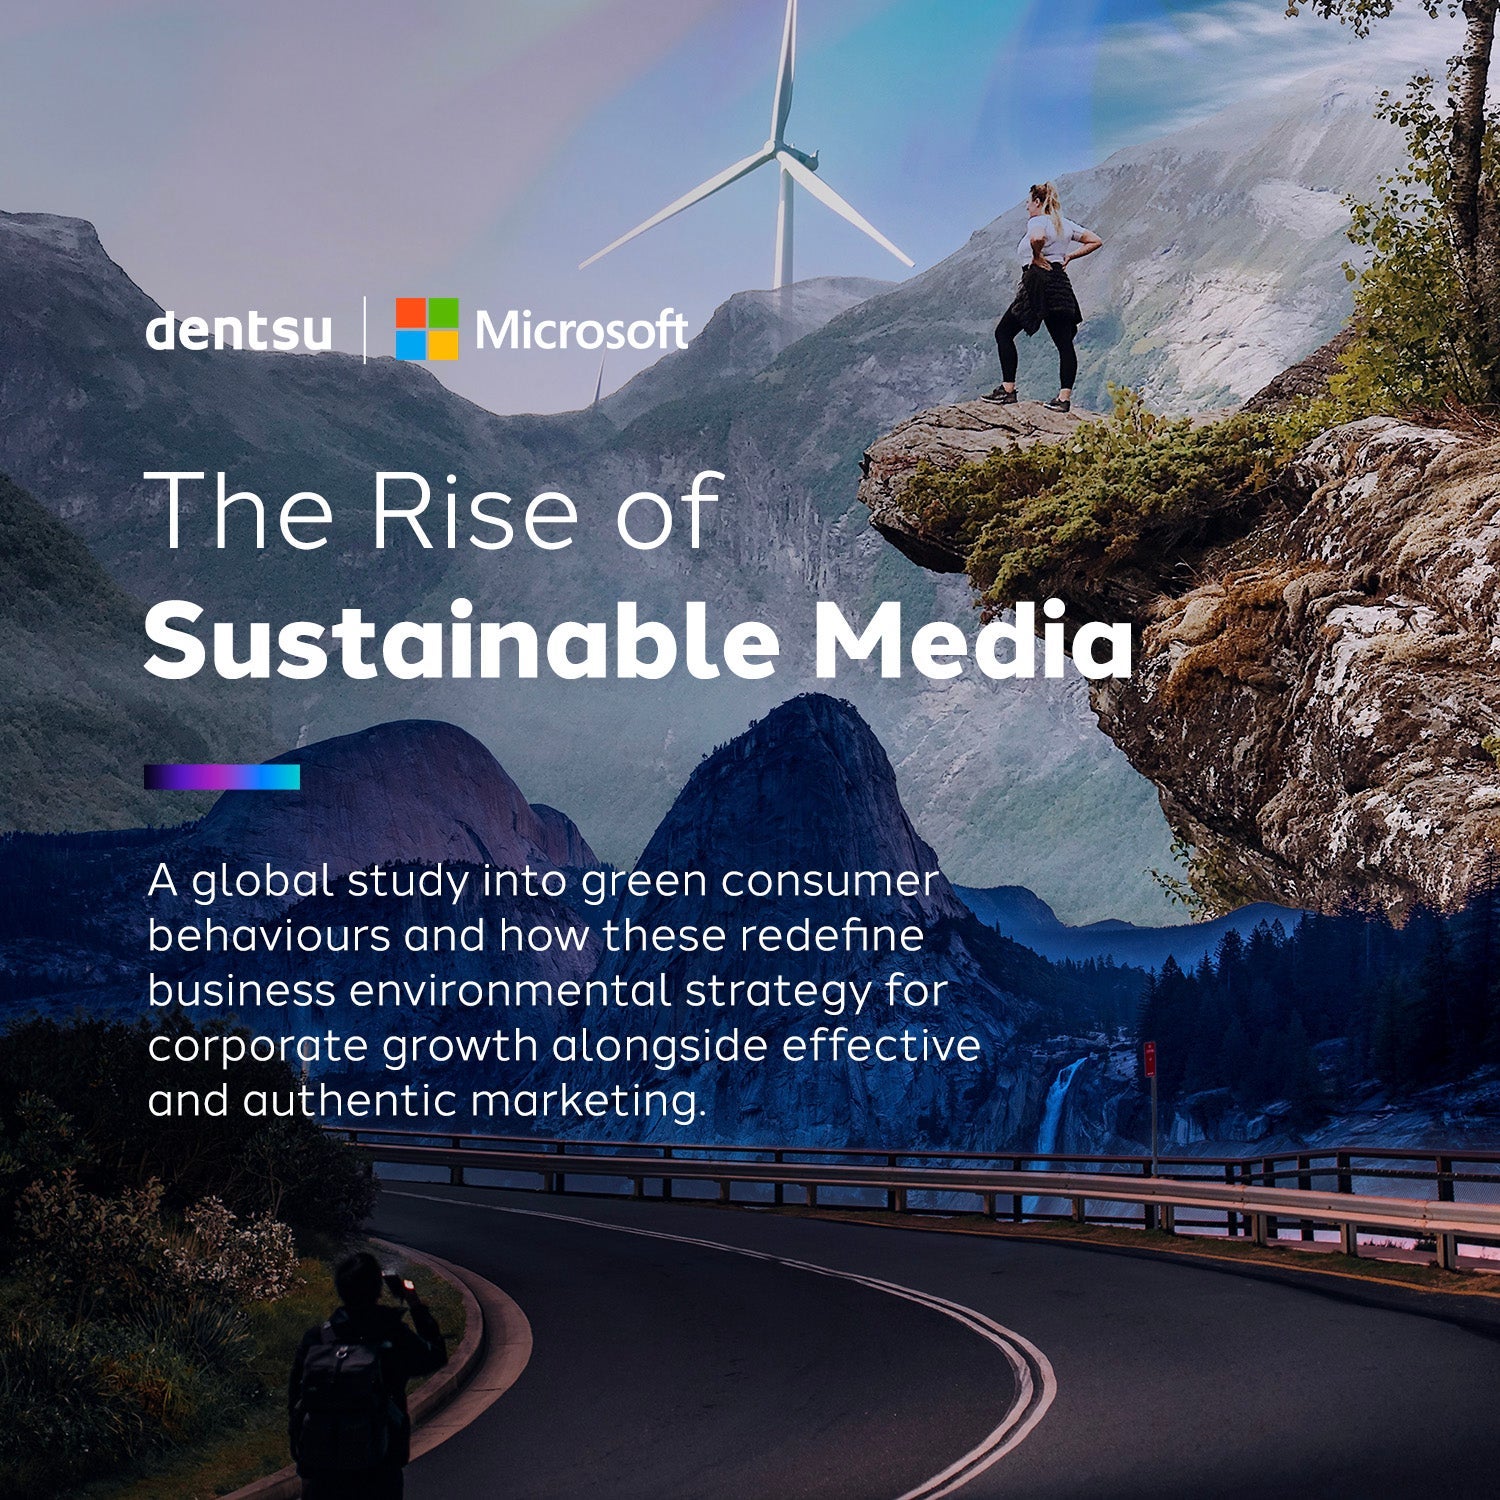 The Rise of Sustainable Media by dentsu and Microsoft